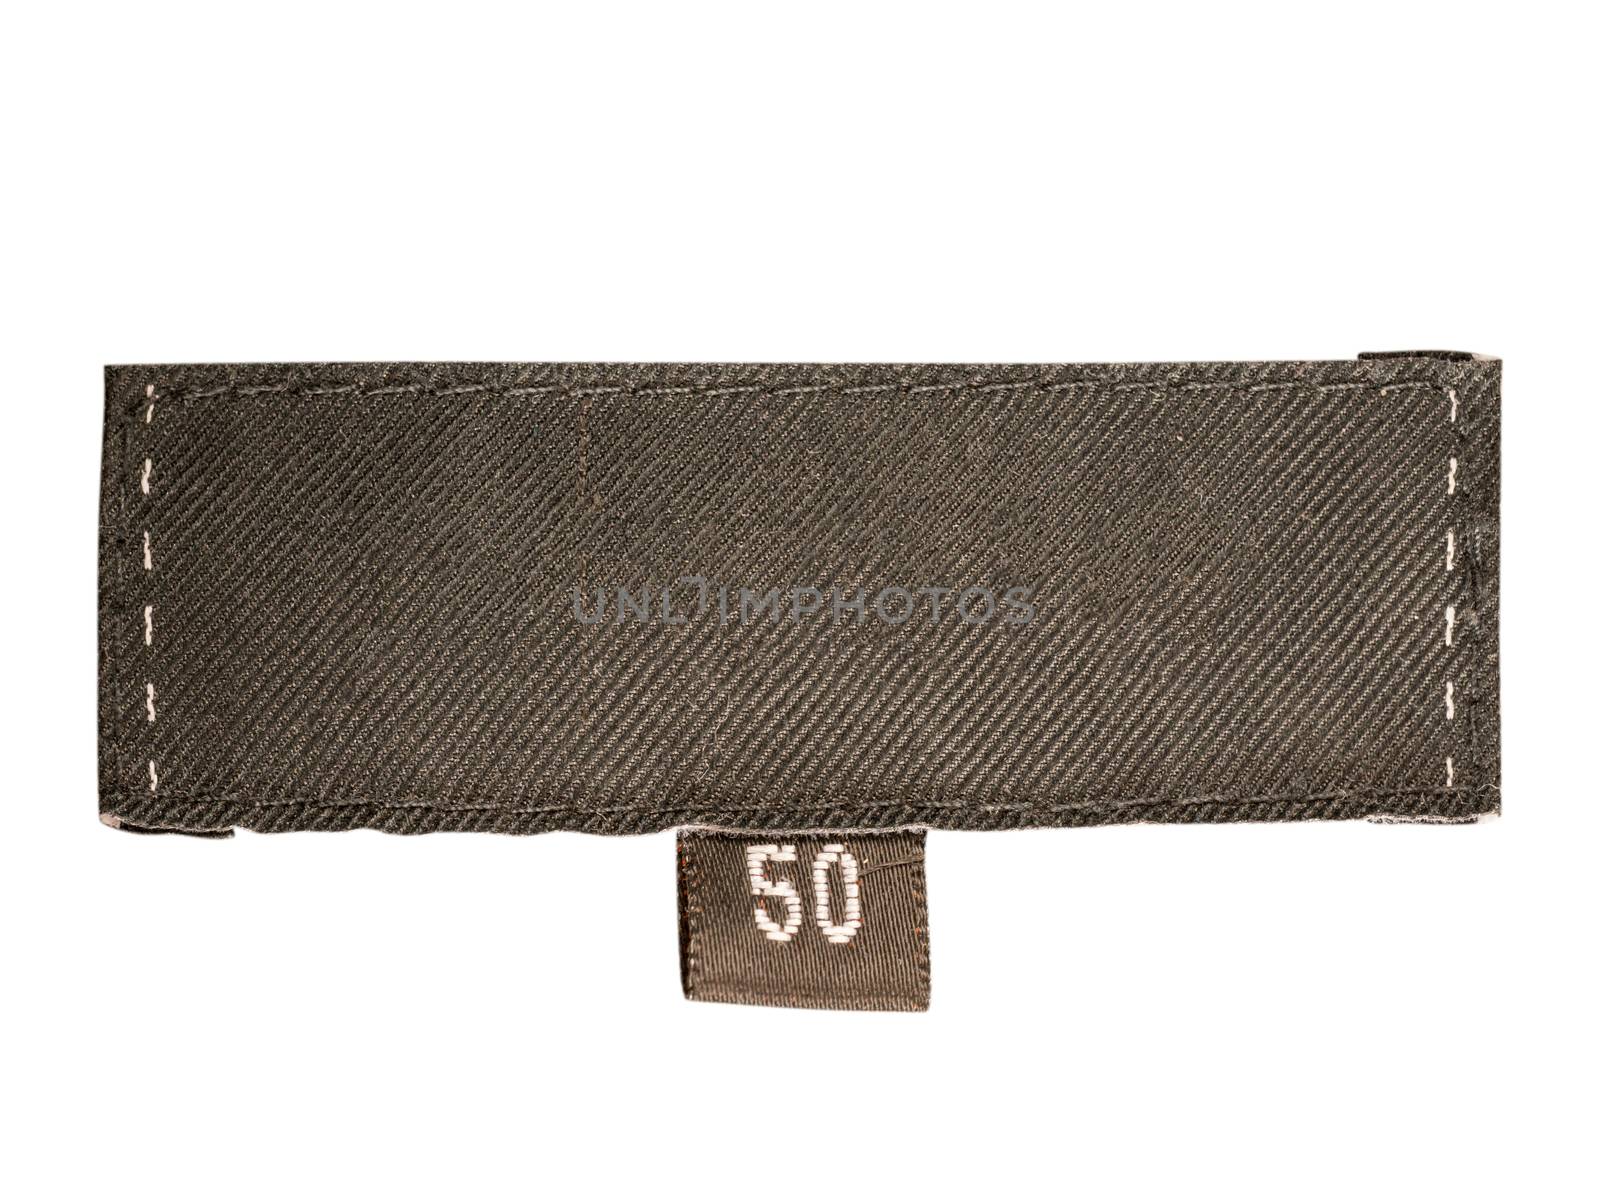 Blank dark clothes label of 50 size - isolated on white background